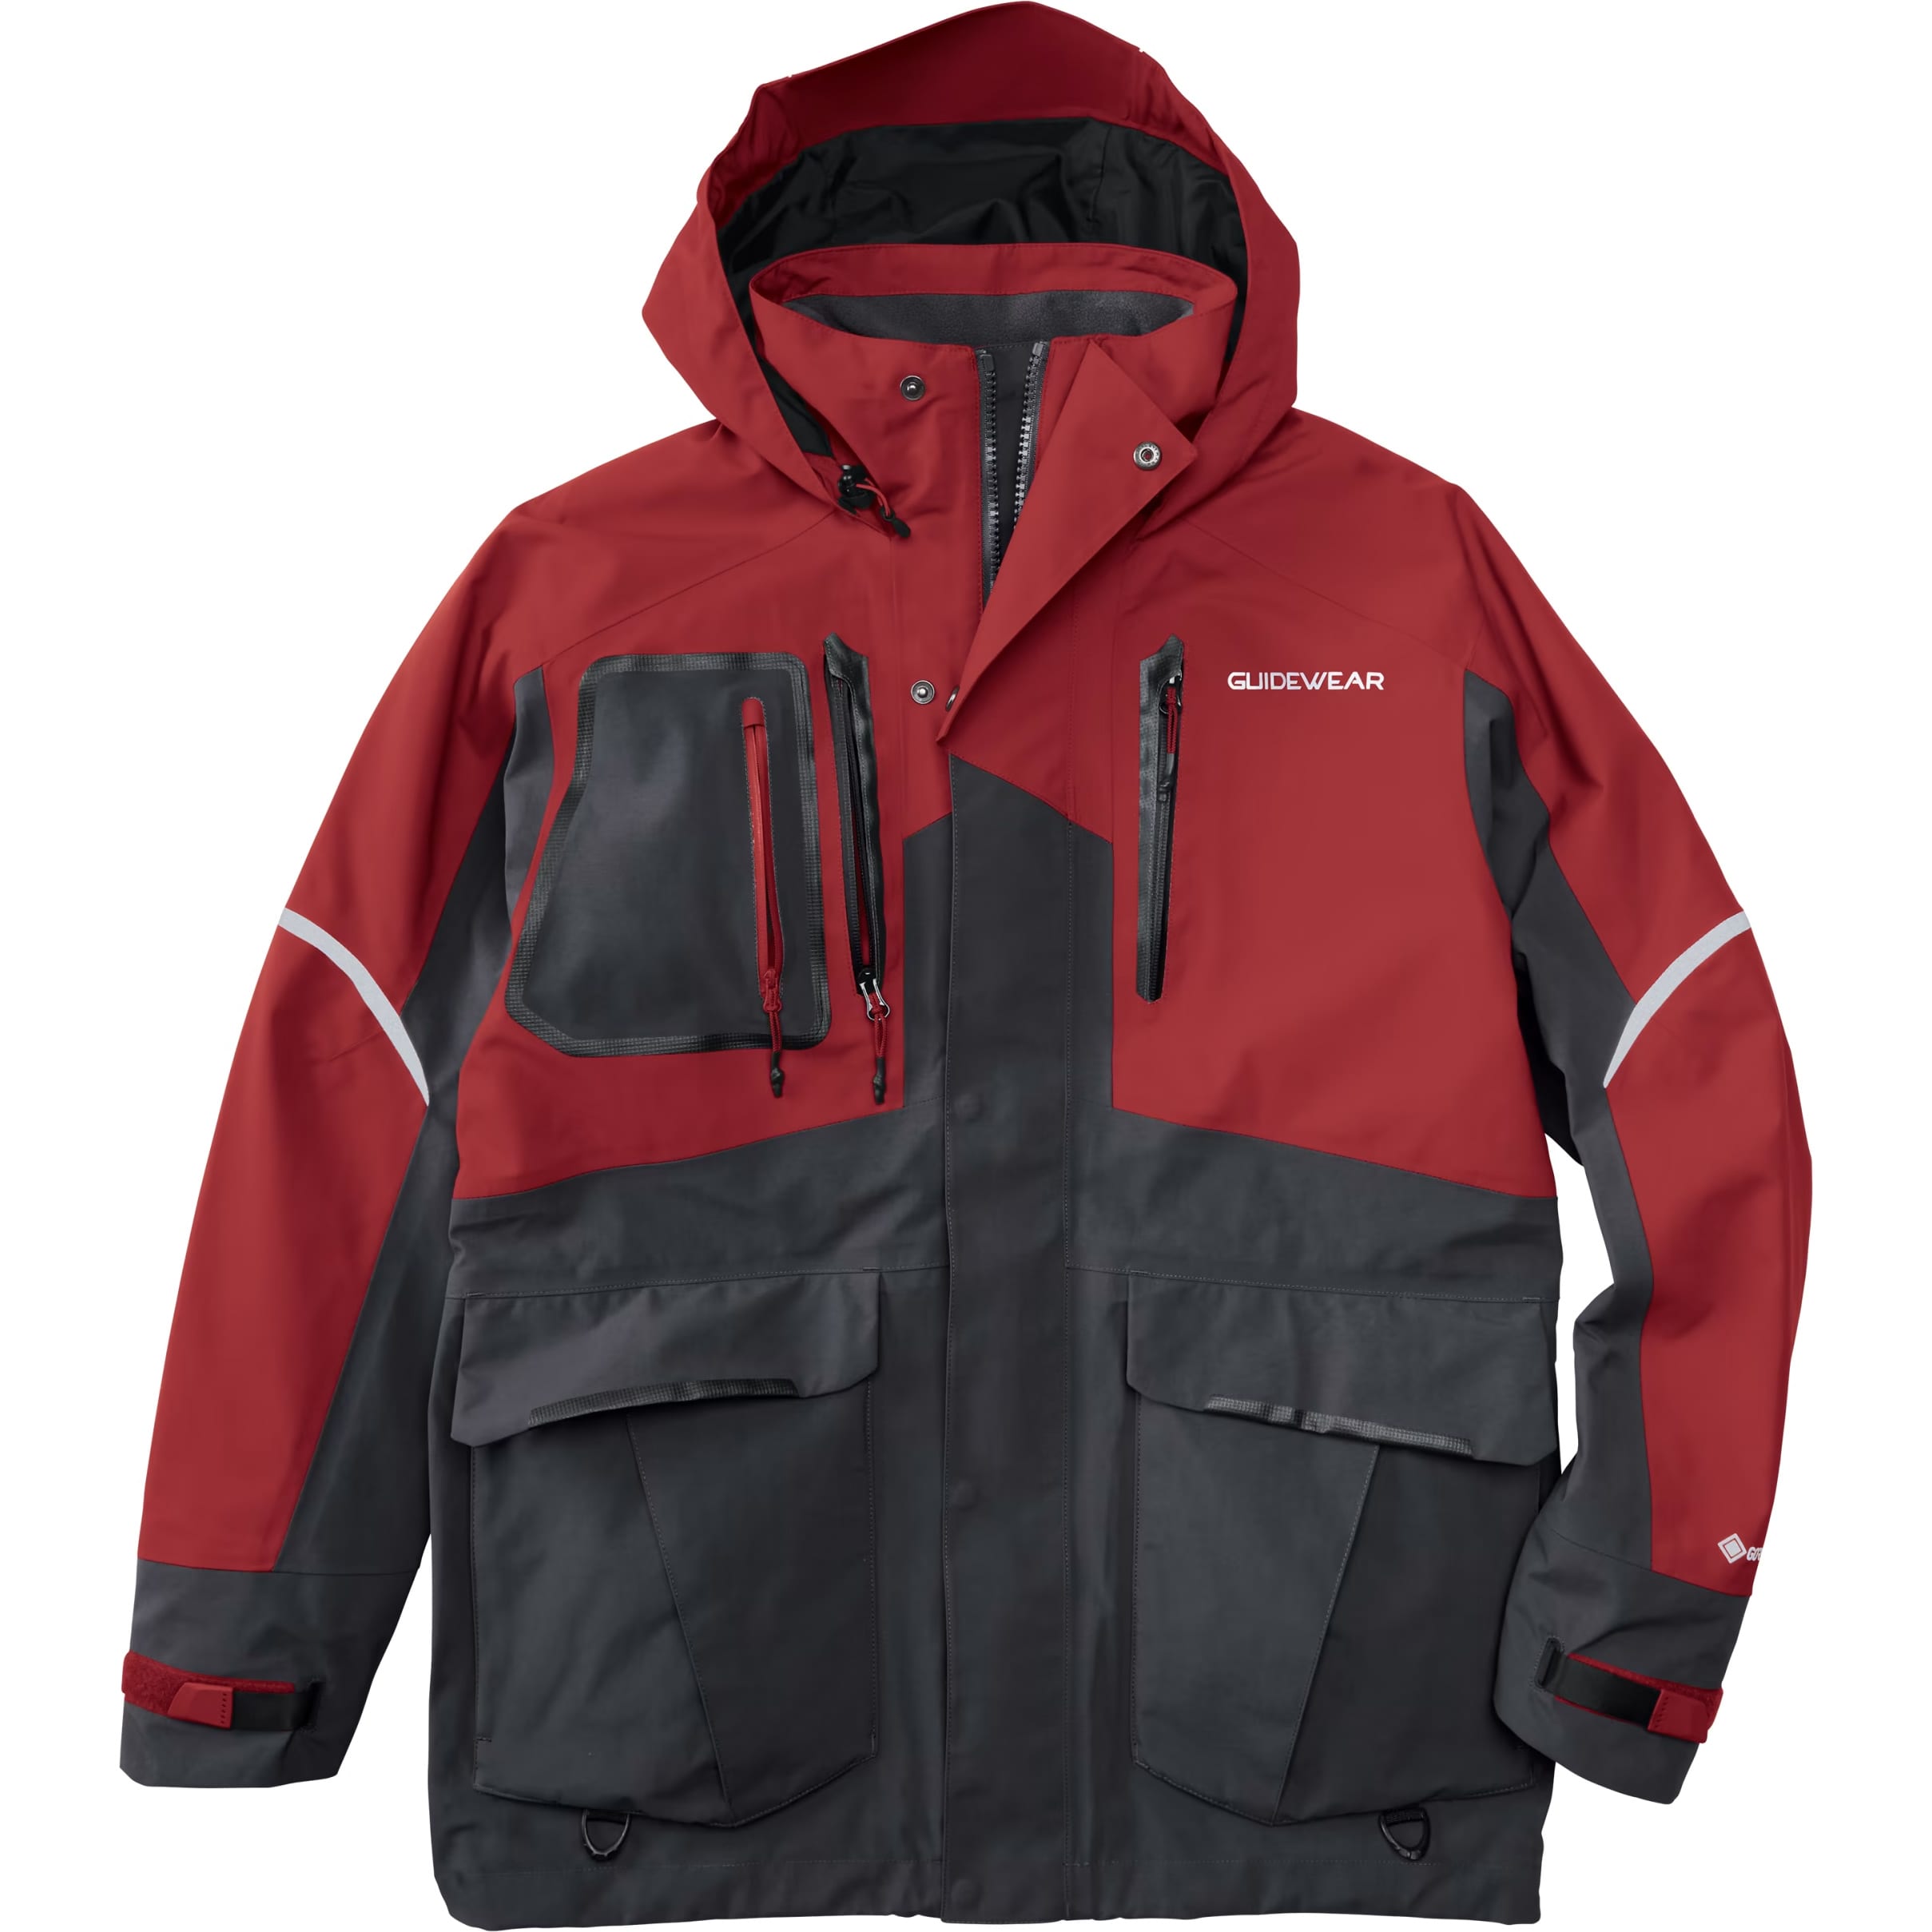 Guidewear Men's Xtreme Jacket with GORE-TEX